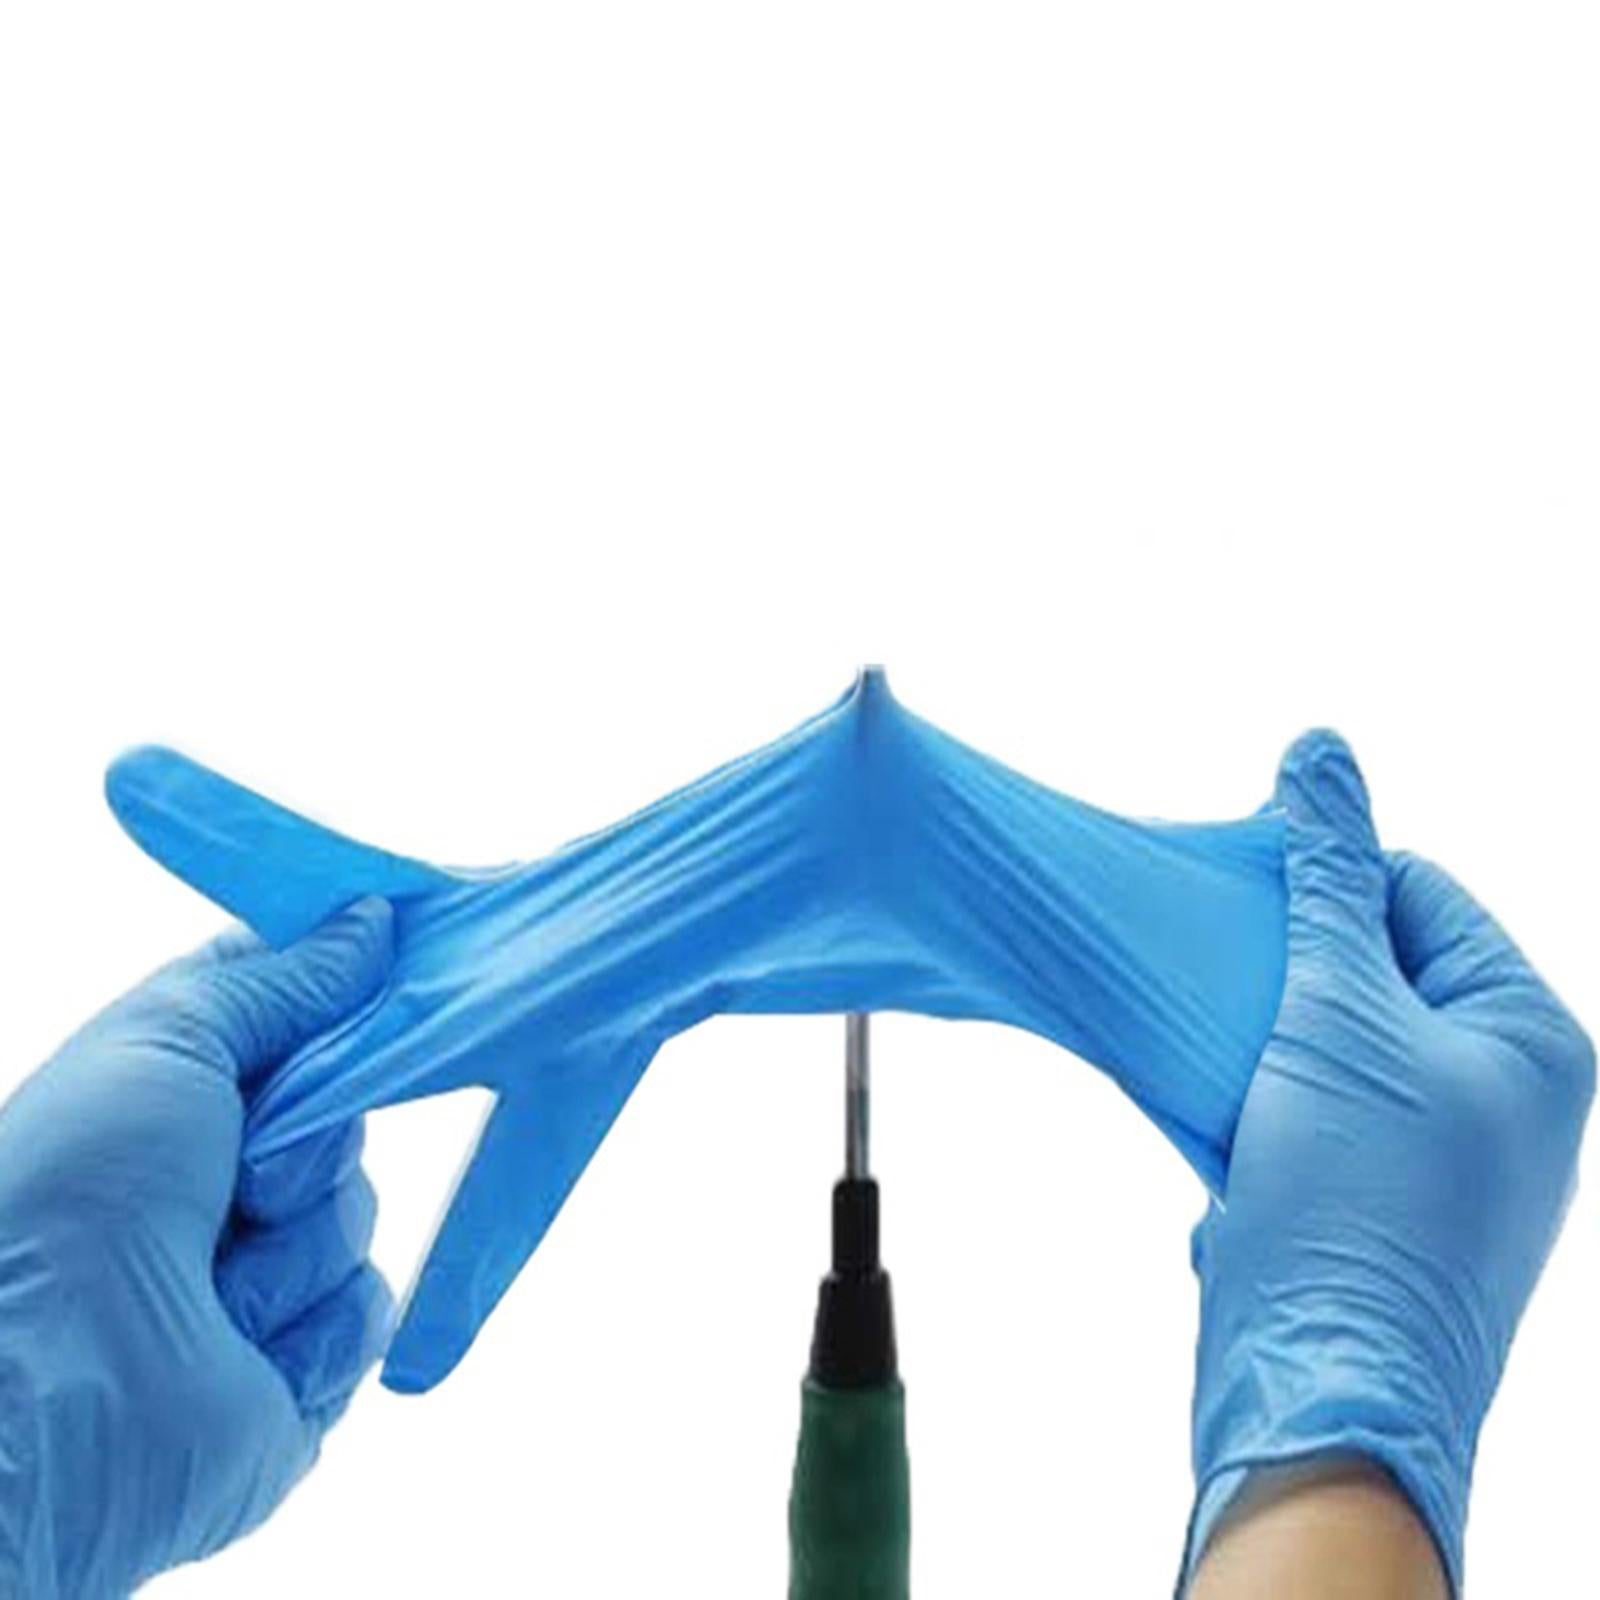 10Pcs Strong Nitrile Gloves Powder Free Pet Care Protective Gloves Blue M